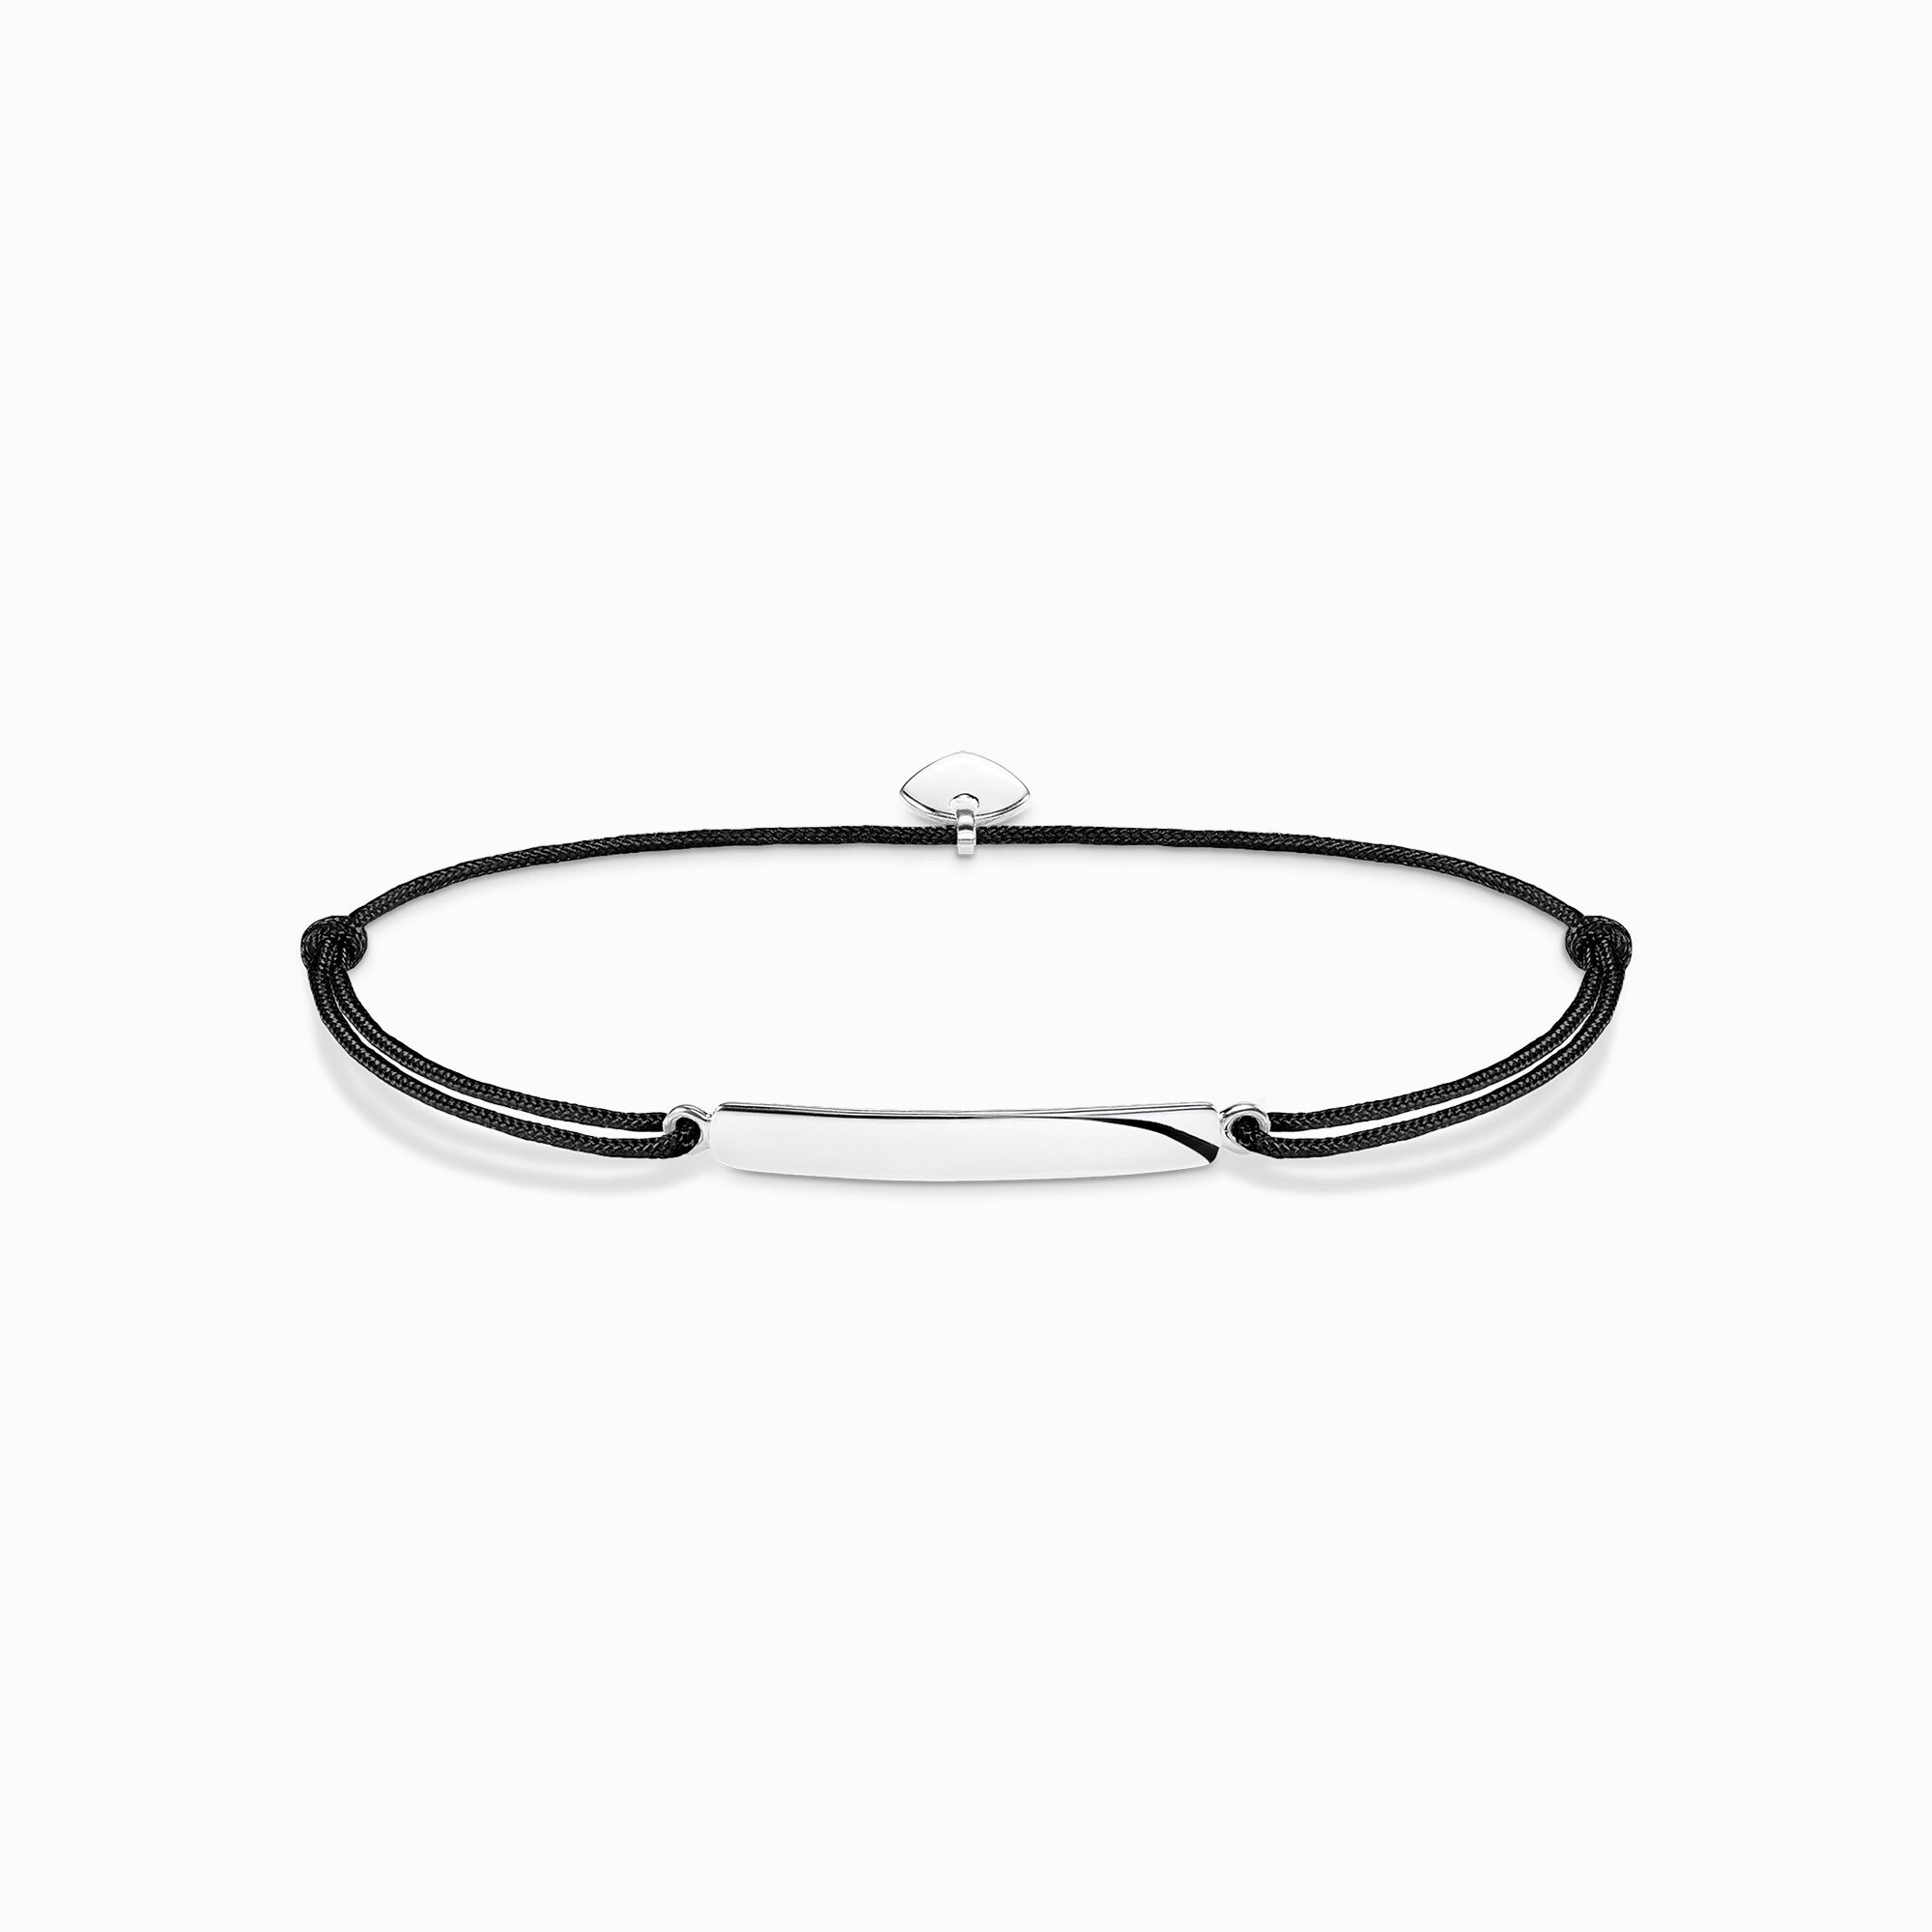 Bracelet Little Secret classic from the  collection in the THOMAS SABO online store